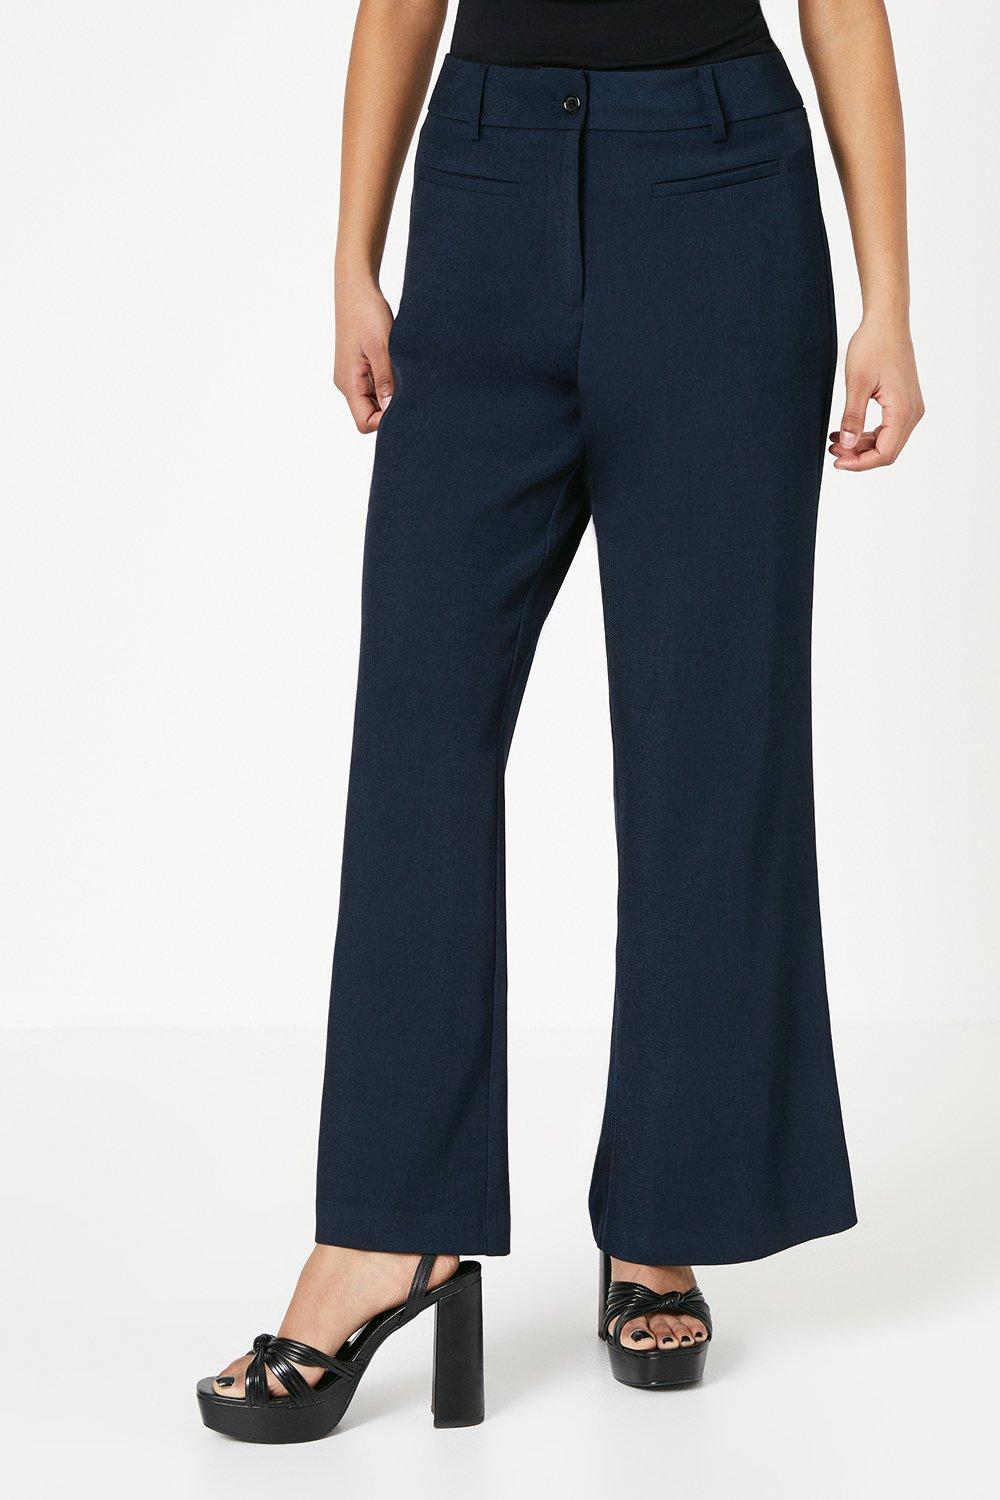 Petite High Waisted Patch Back Pocket Trouser